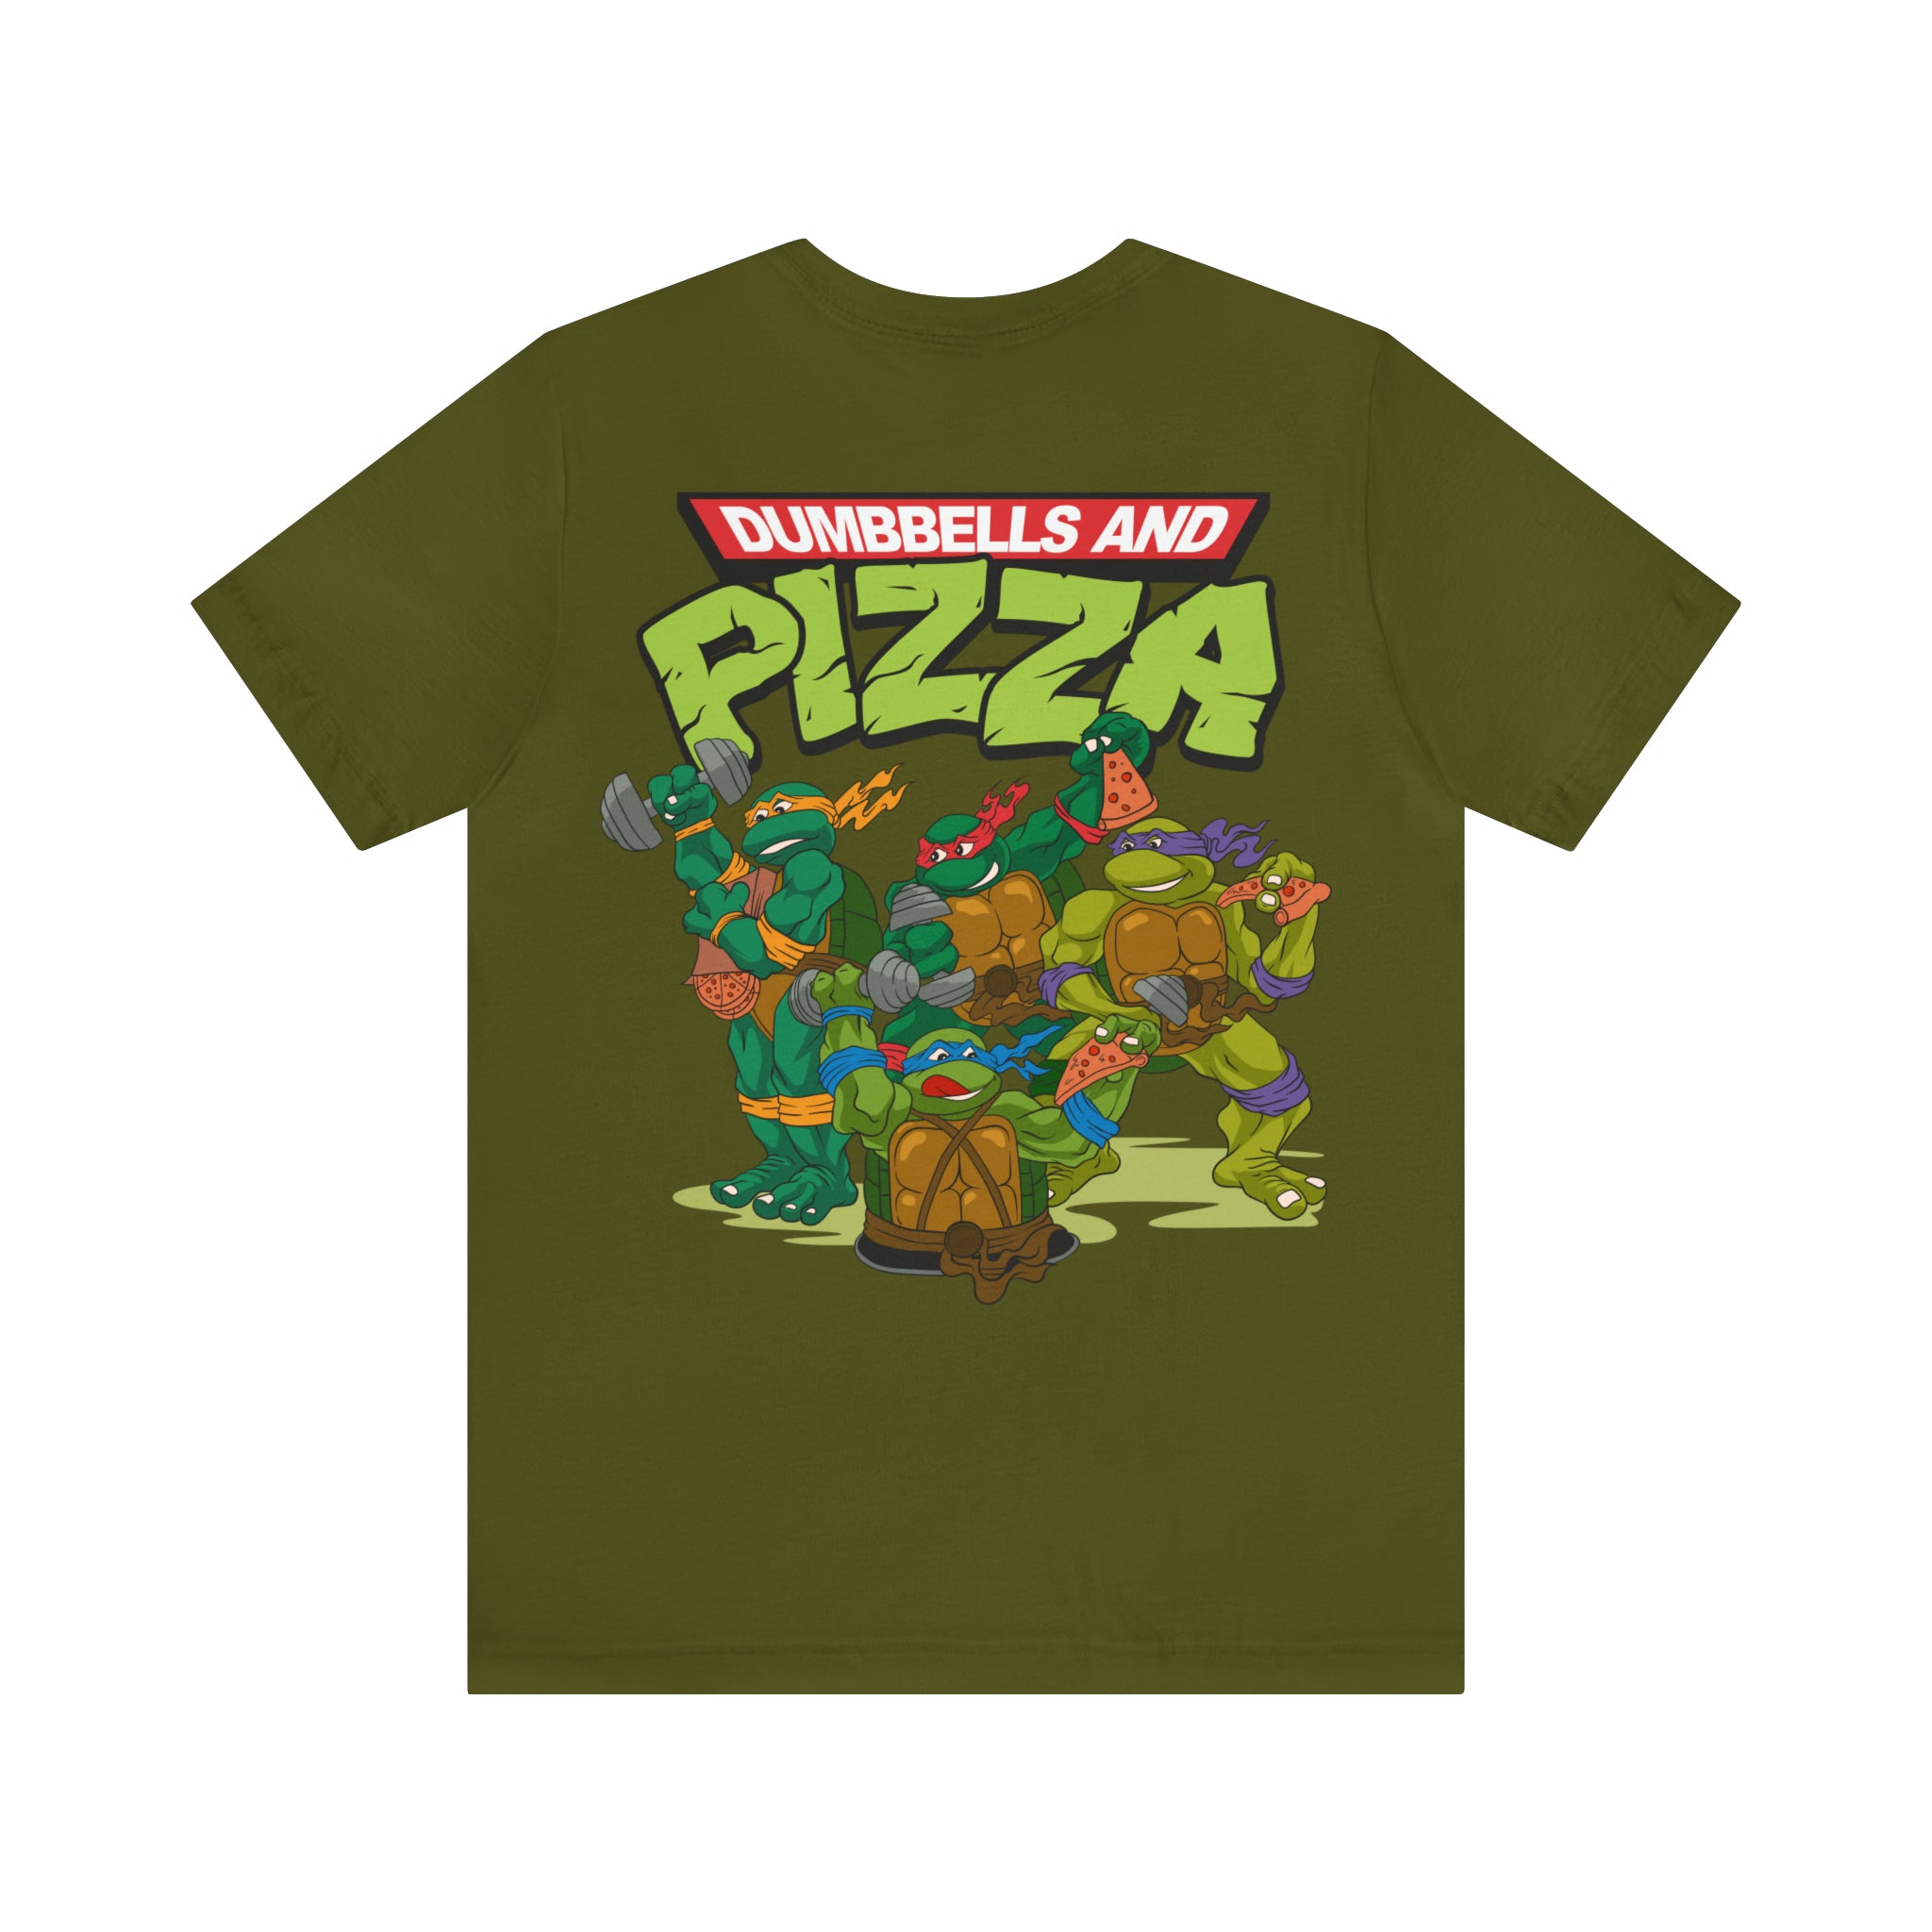 Dumbbells And Pizza Unisex T-shirt